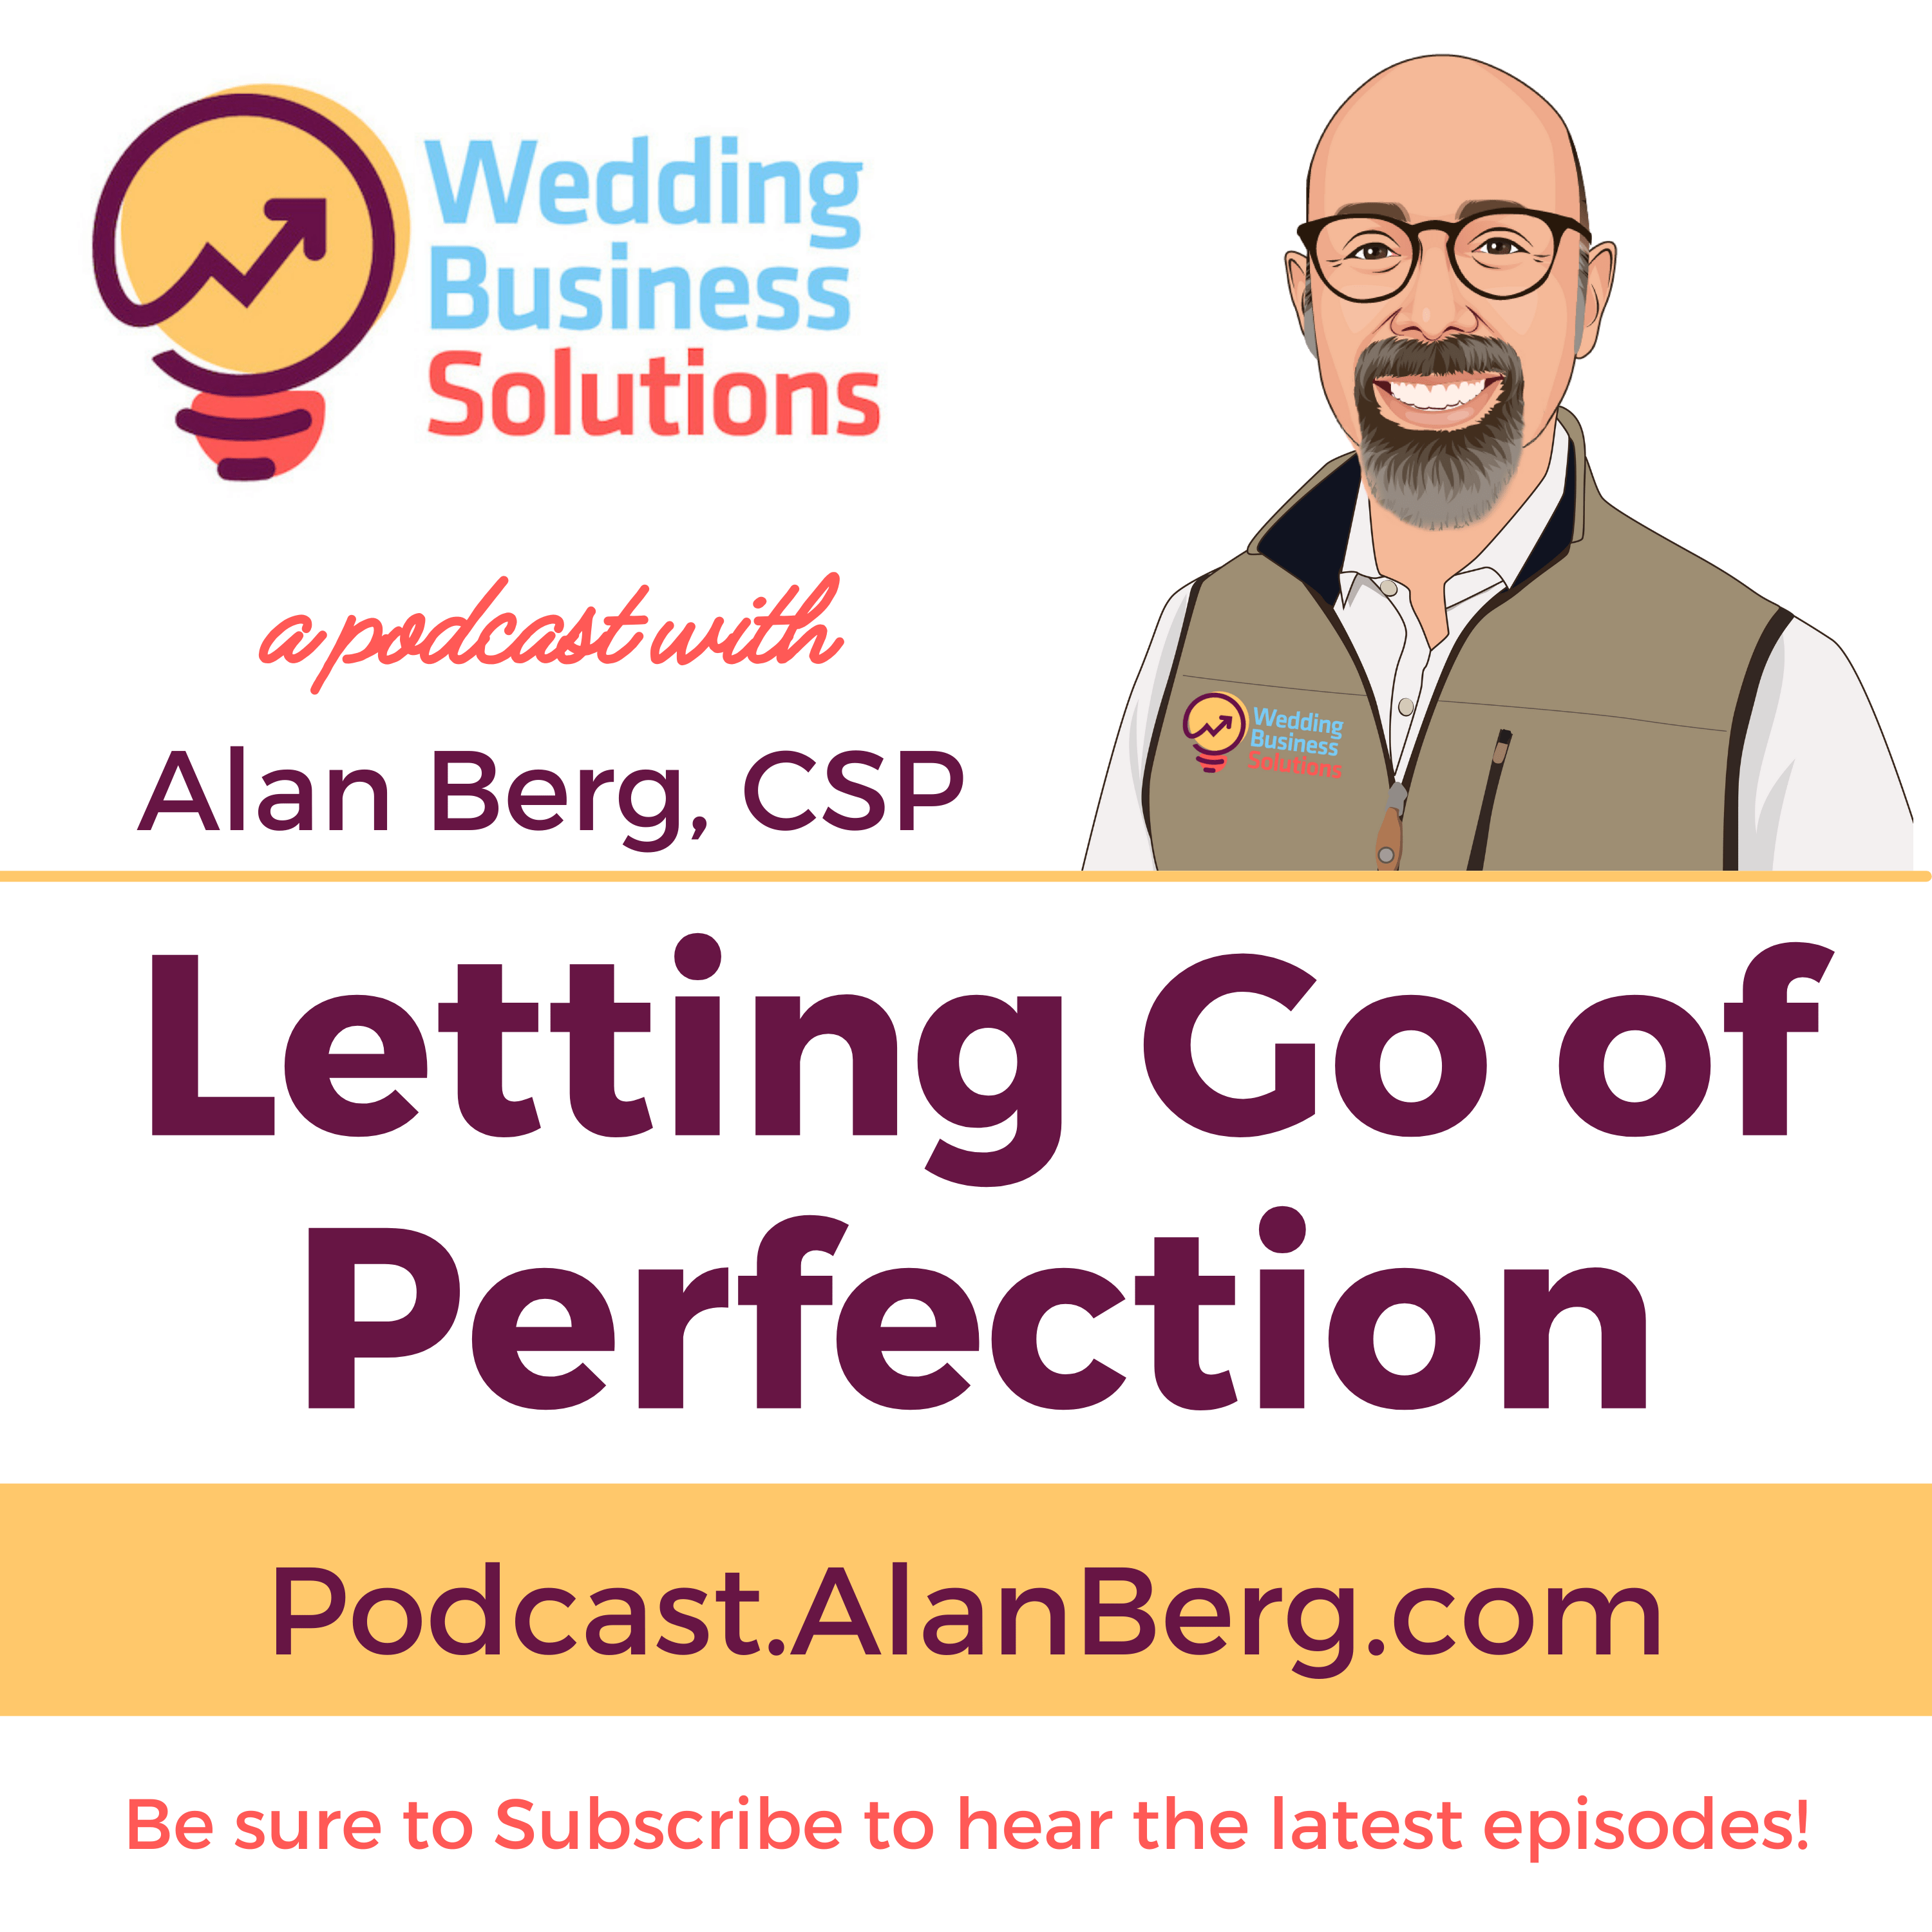 Letting Go of Perfection - Alan Berg CSP, Wedding Business Solutions Podcast